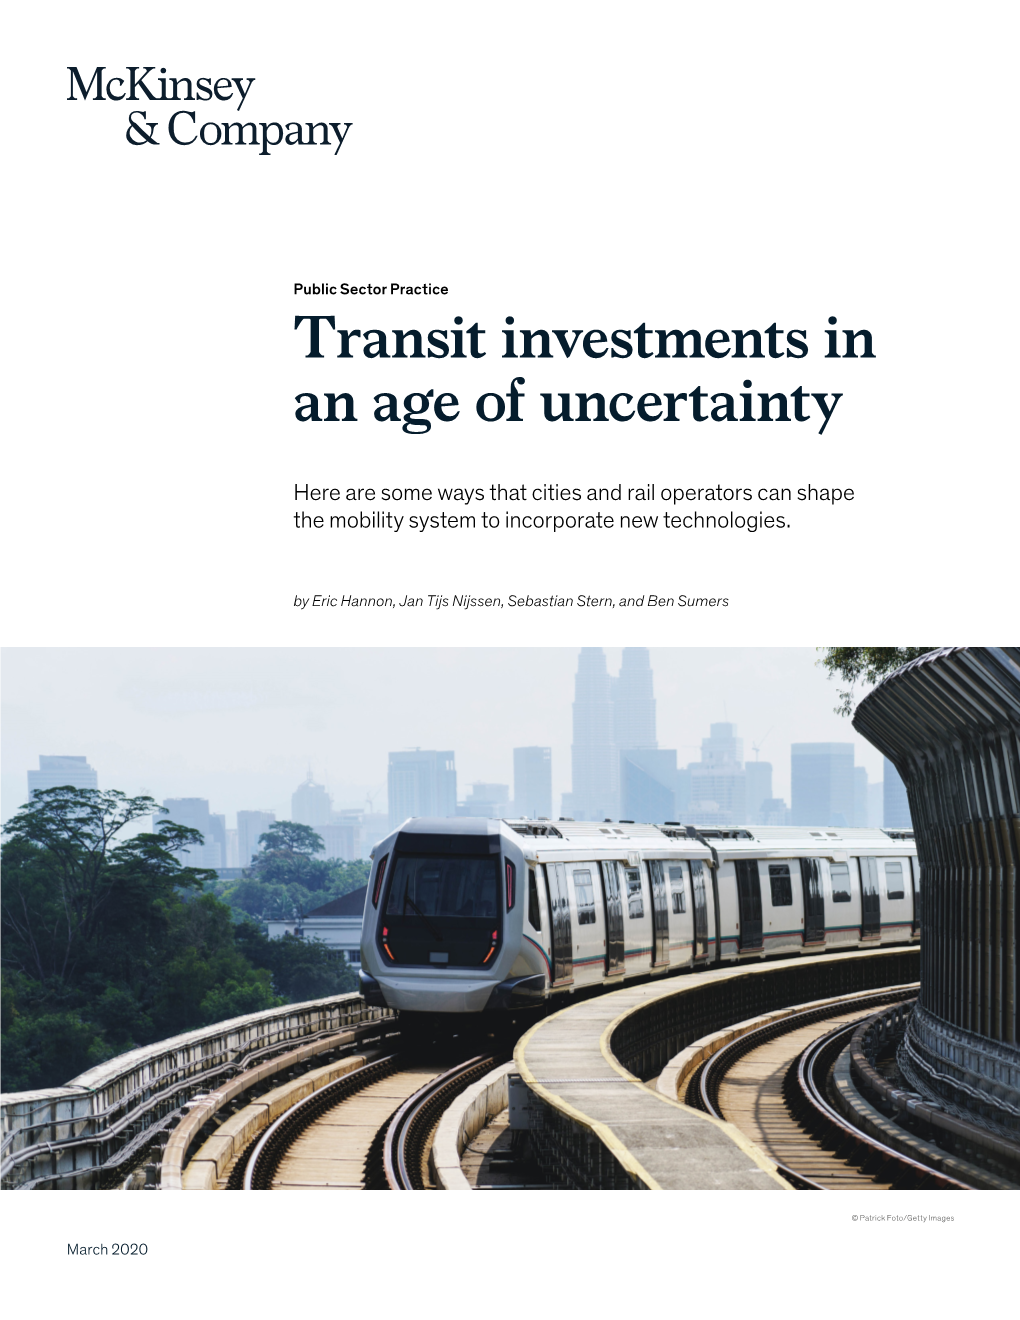 Transit Investments in an Age of Uncertainty